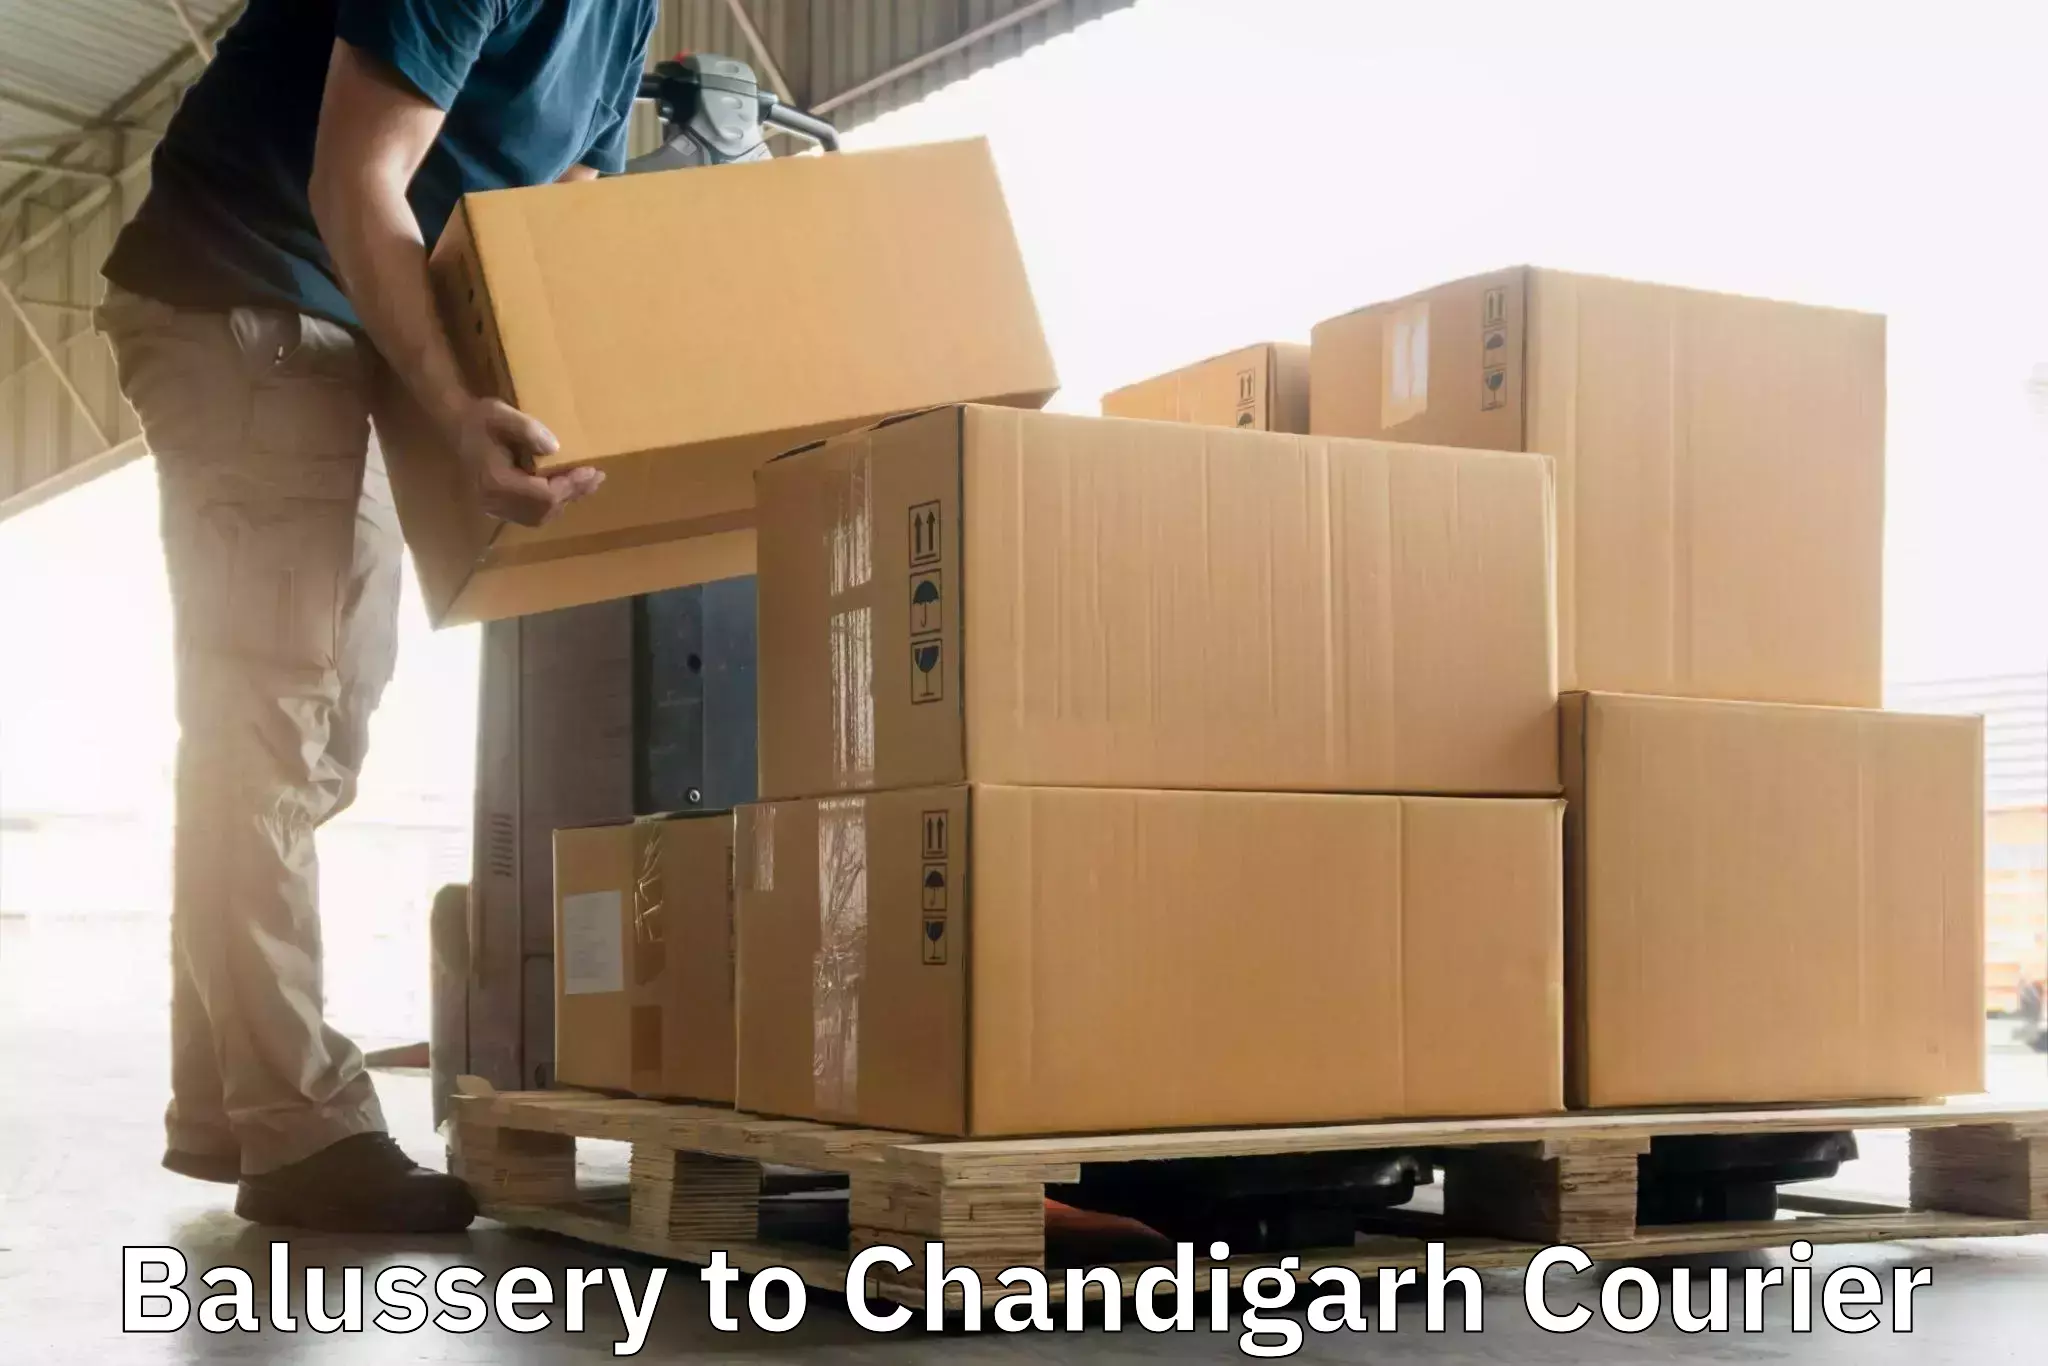 On-call courier service Balussery to Chandigarh